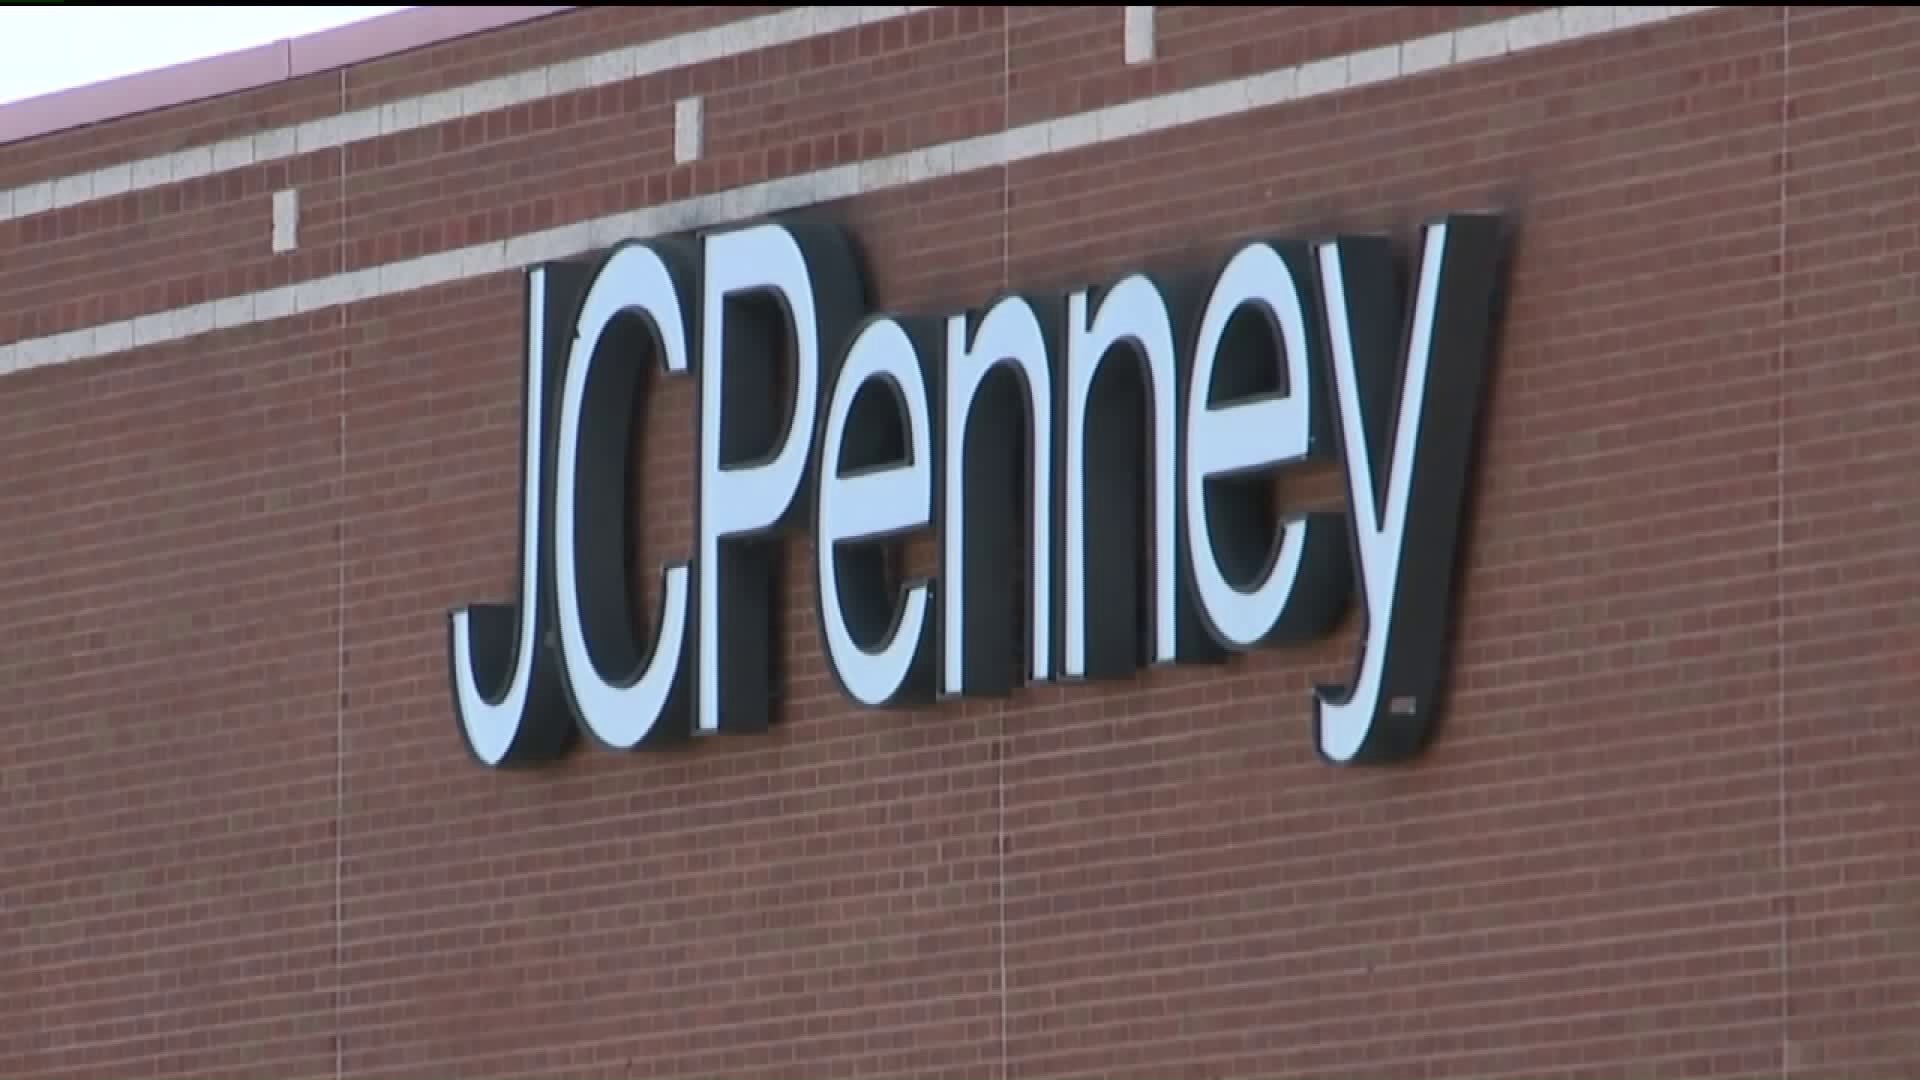 JCPenney Announces Store Closings, Some in Our Area